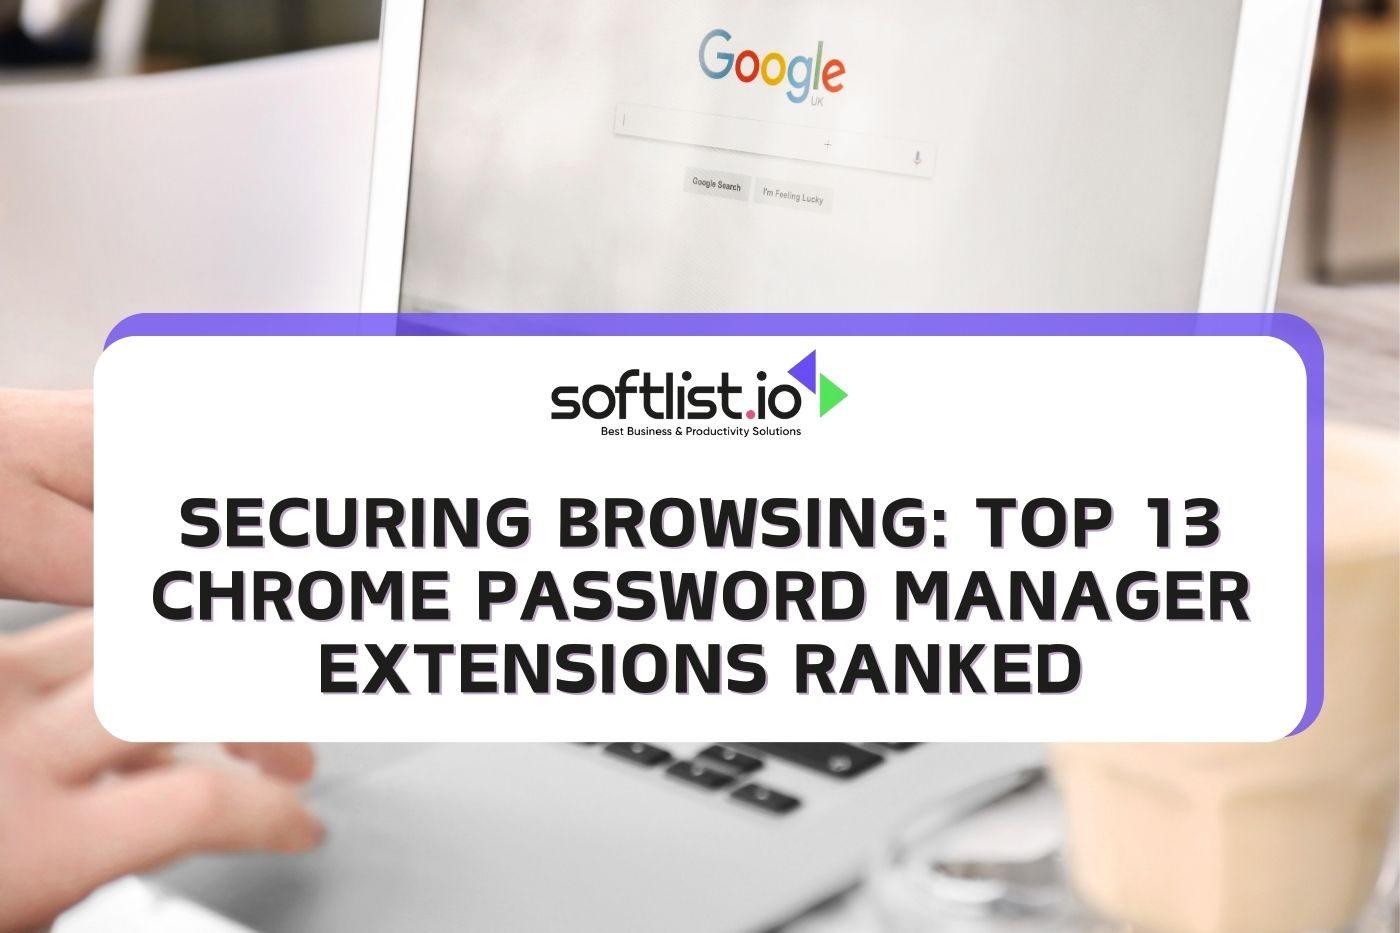 Securing Browsing: Top 13 Chrome Password Manager Extensions Ranked